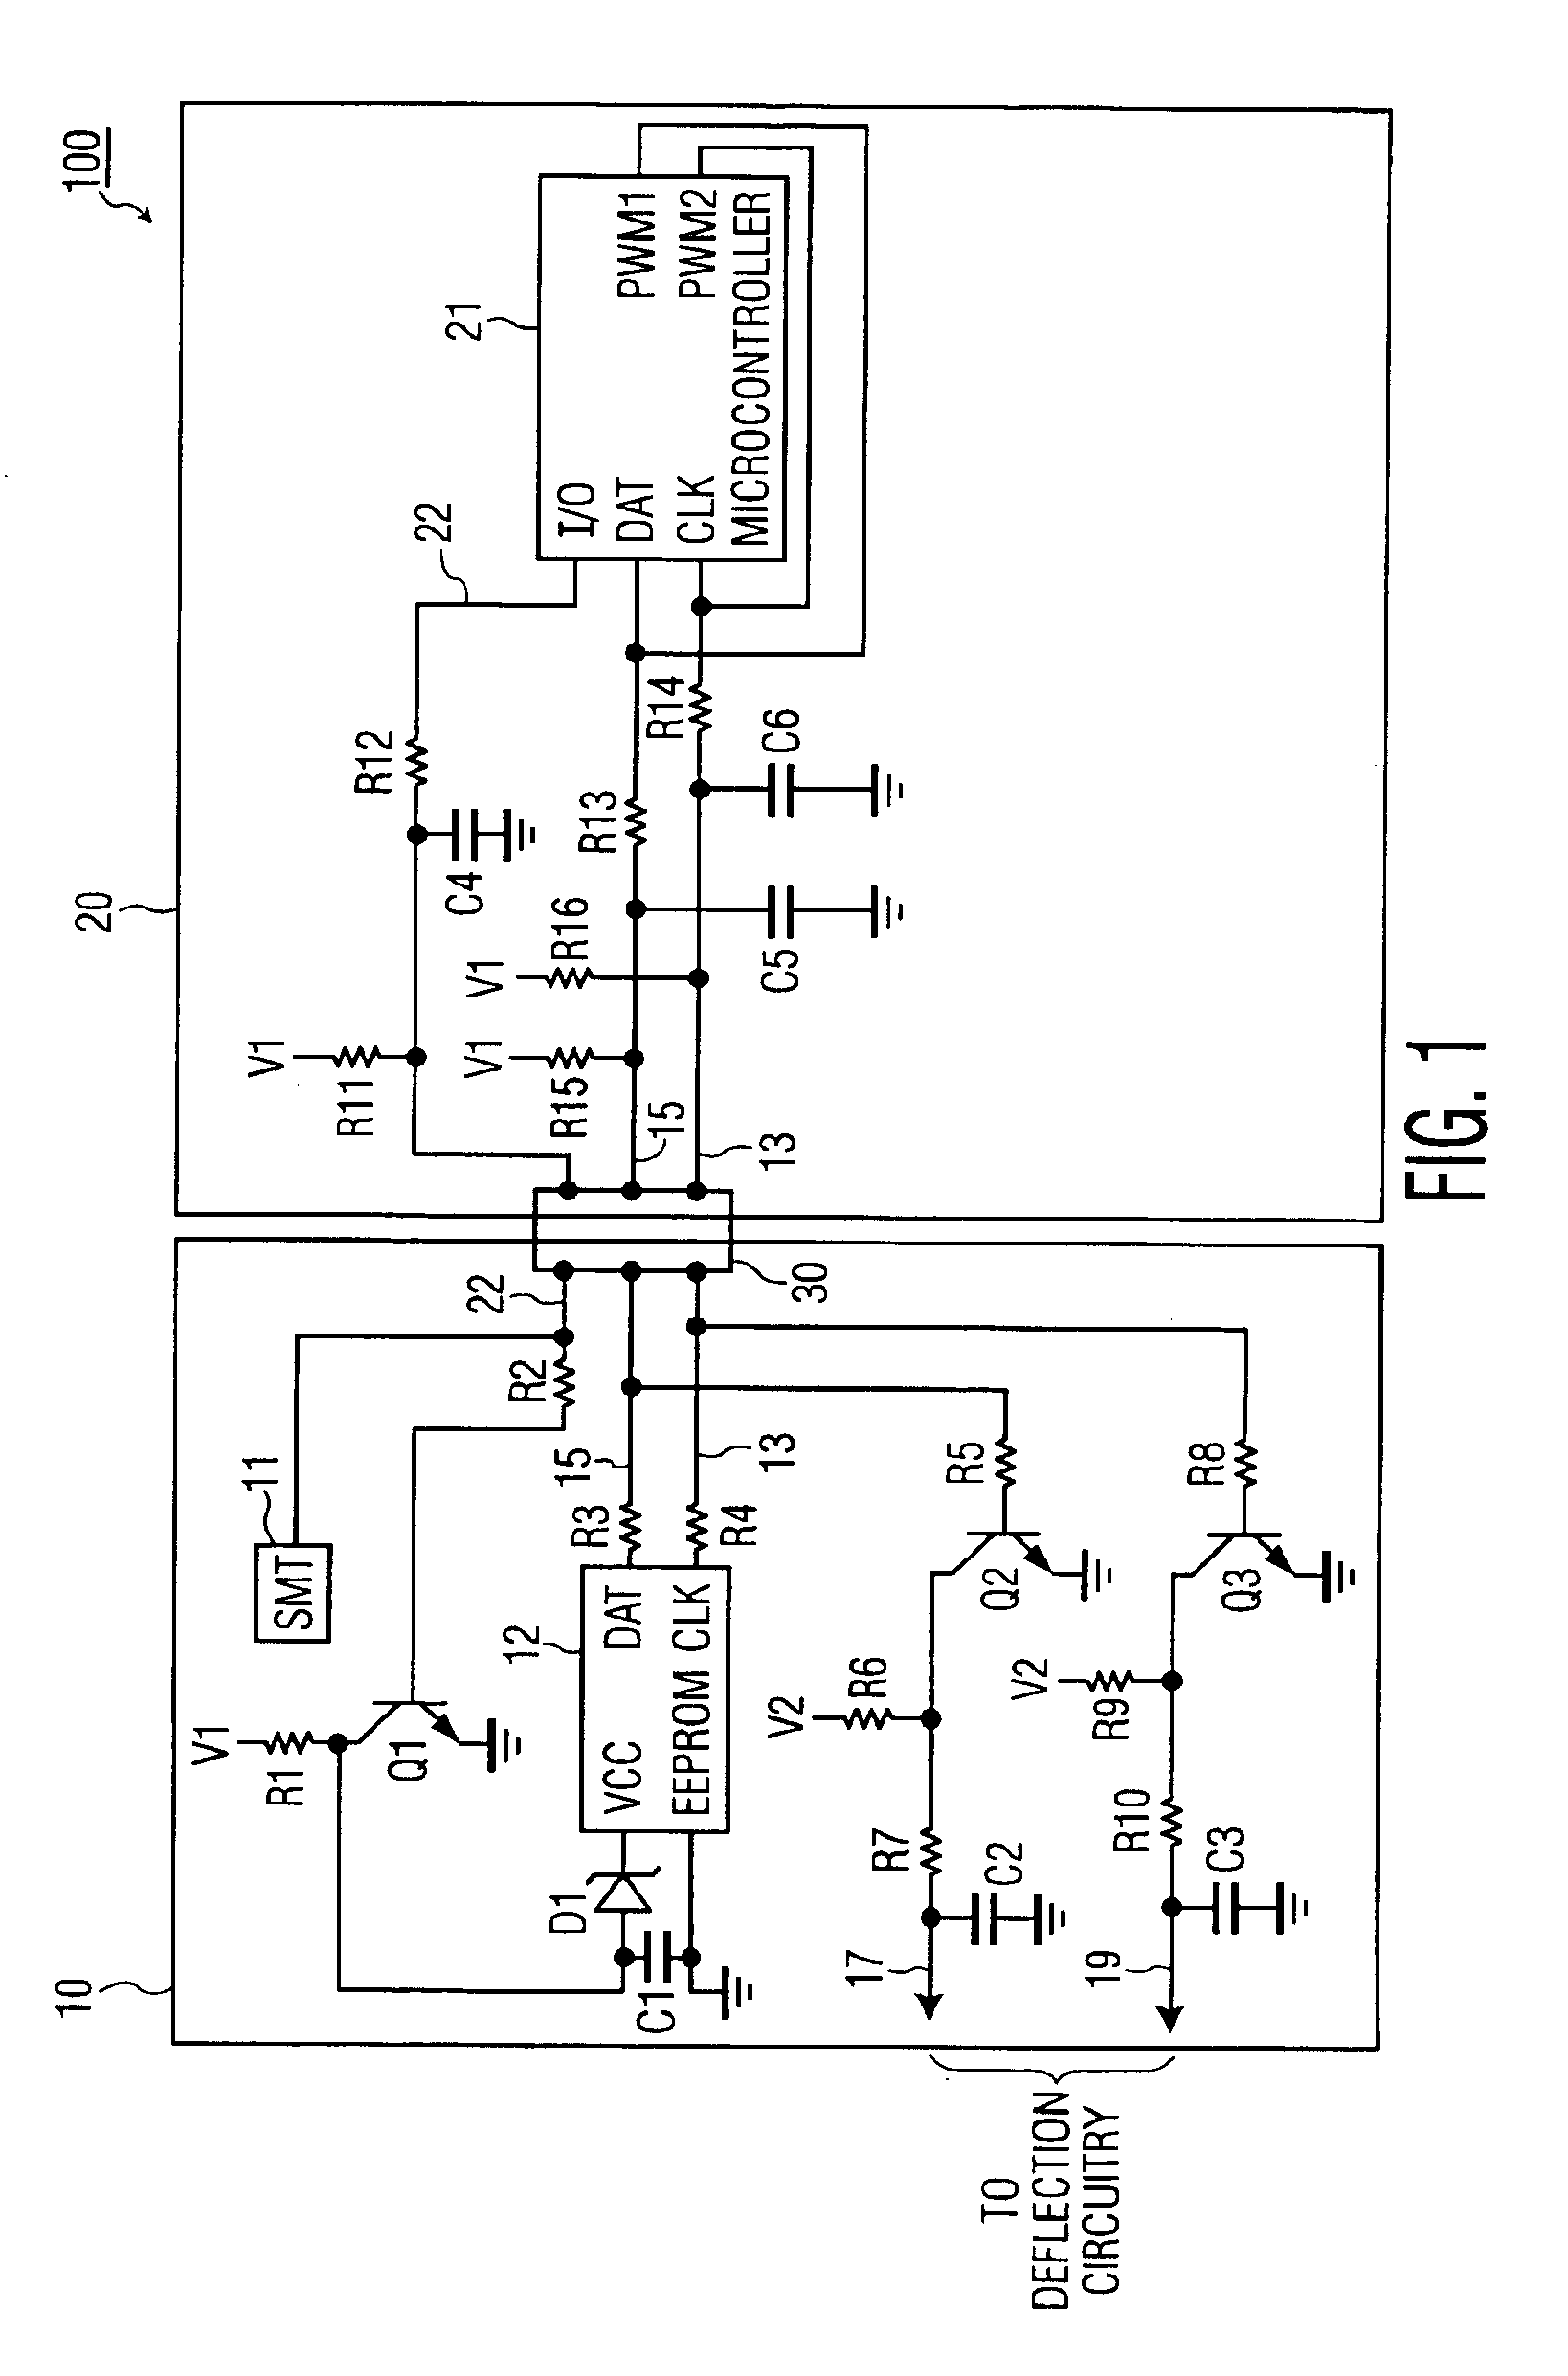 Apparatus and method for protecting a memory sharing signal control lines with other circuitry